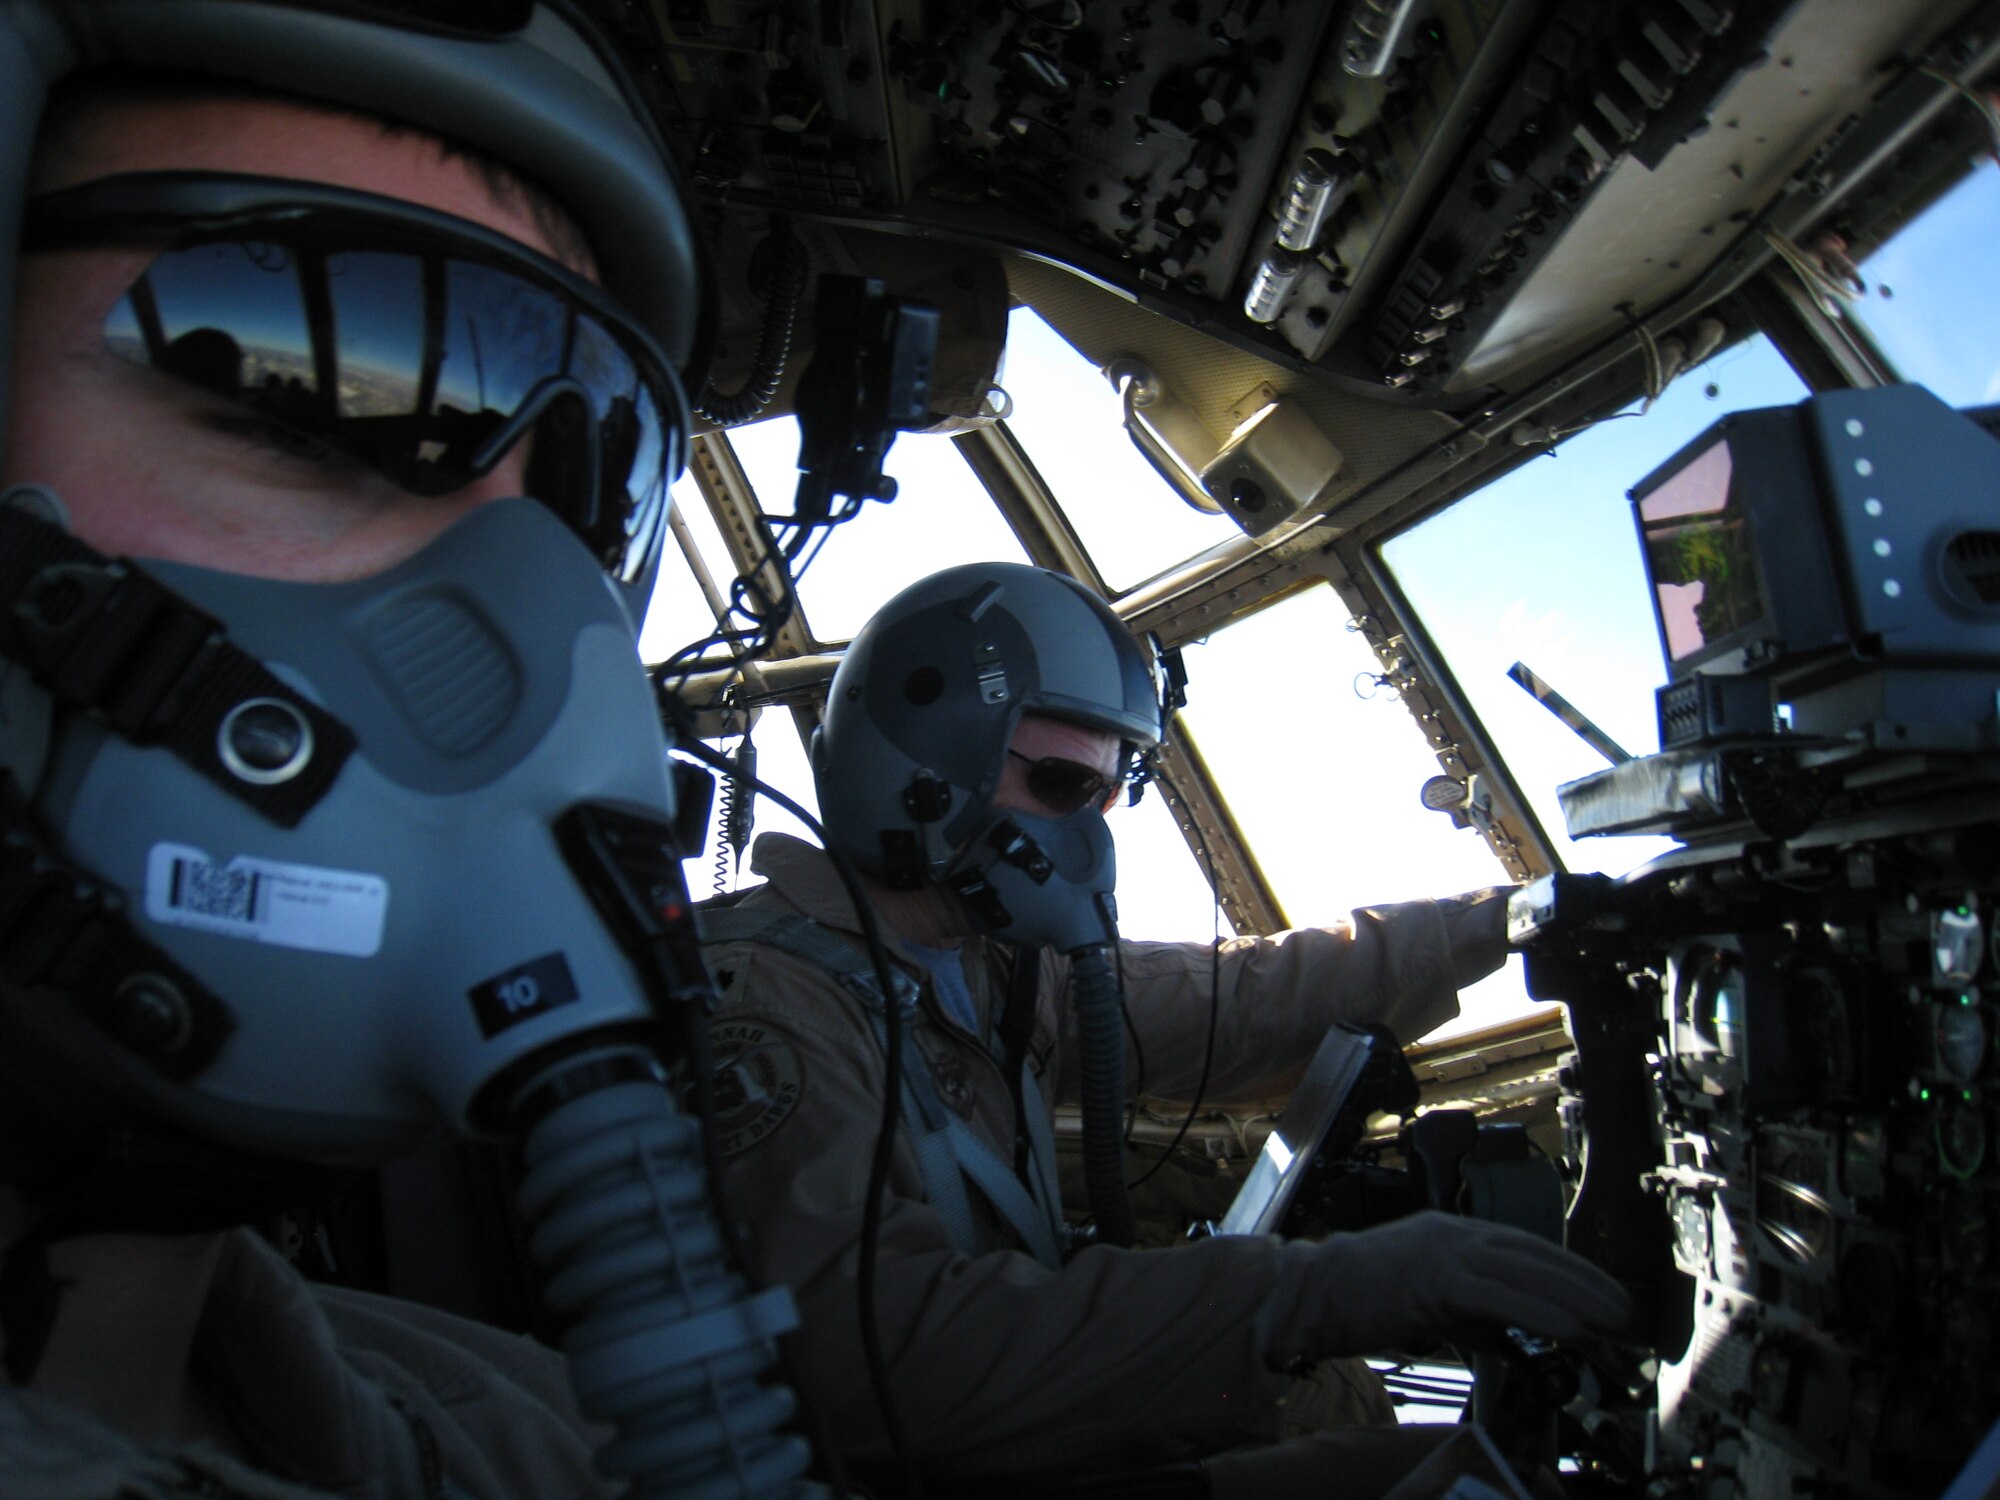 BAGRAM AIRFIELD, Afghanistan - Lt. Col. Tommy Atkinson (right) pilots a
C-130H Hercules over Northern Afghanistan on a humanitarian airdrop mission. The Airmen of the 774th Expeditionary Airlift Squadron have been dropping an average of five to eight tons of supplies and equipment per mission to Coalition forces and Afghan civilians in support of Operation Enduring Freedom. (U.S. Air Force photo)